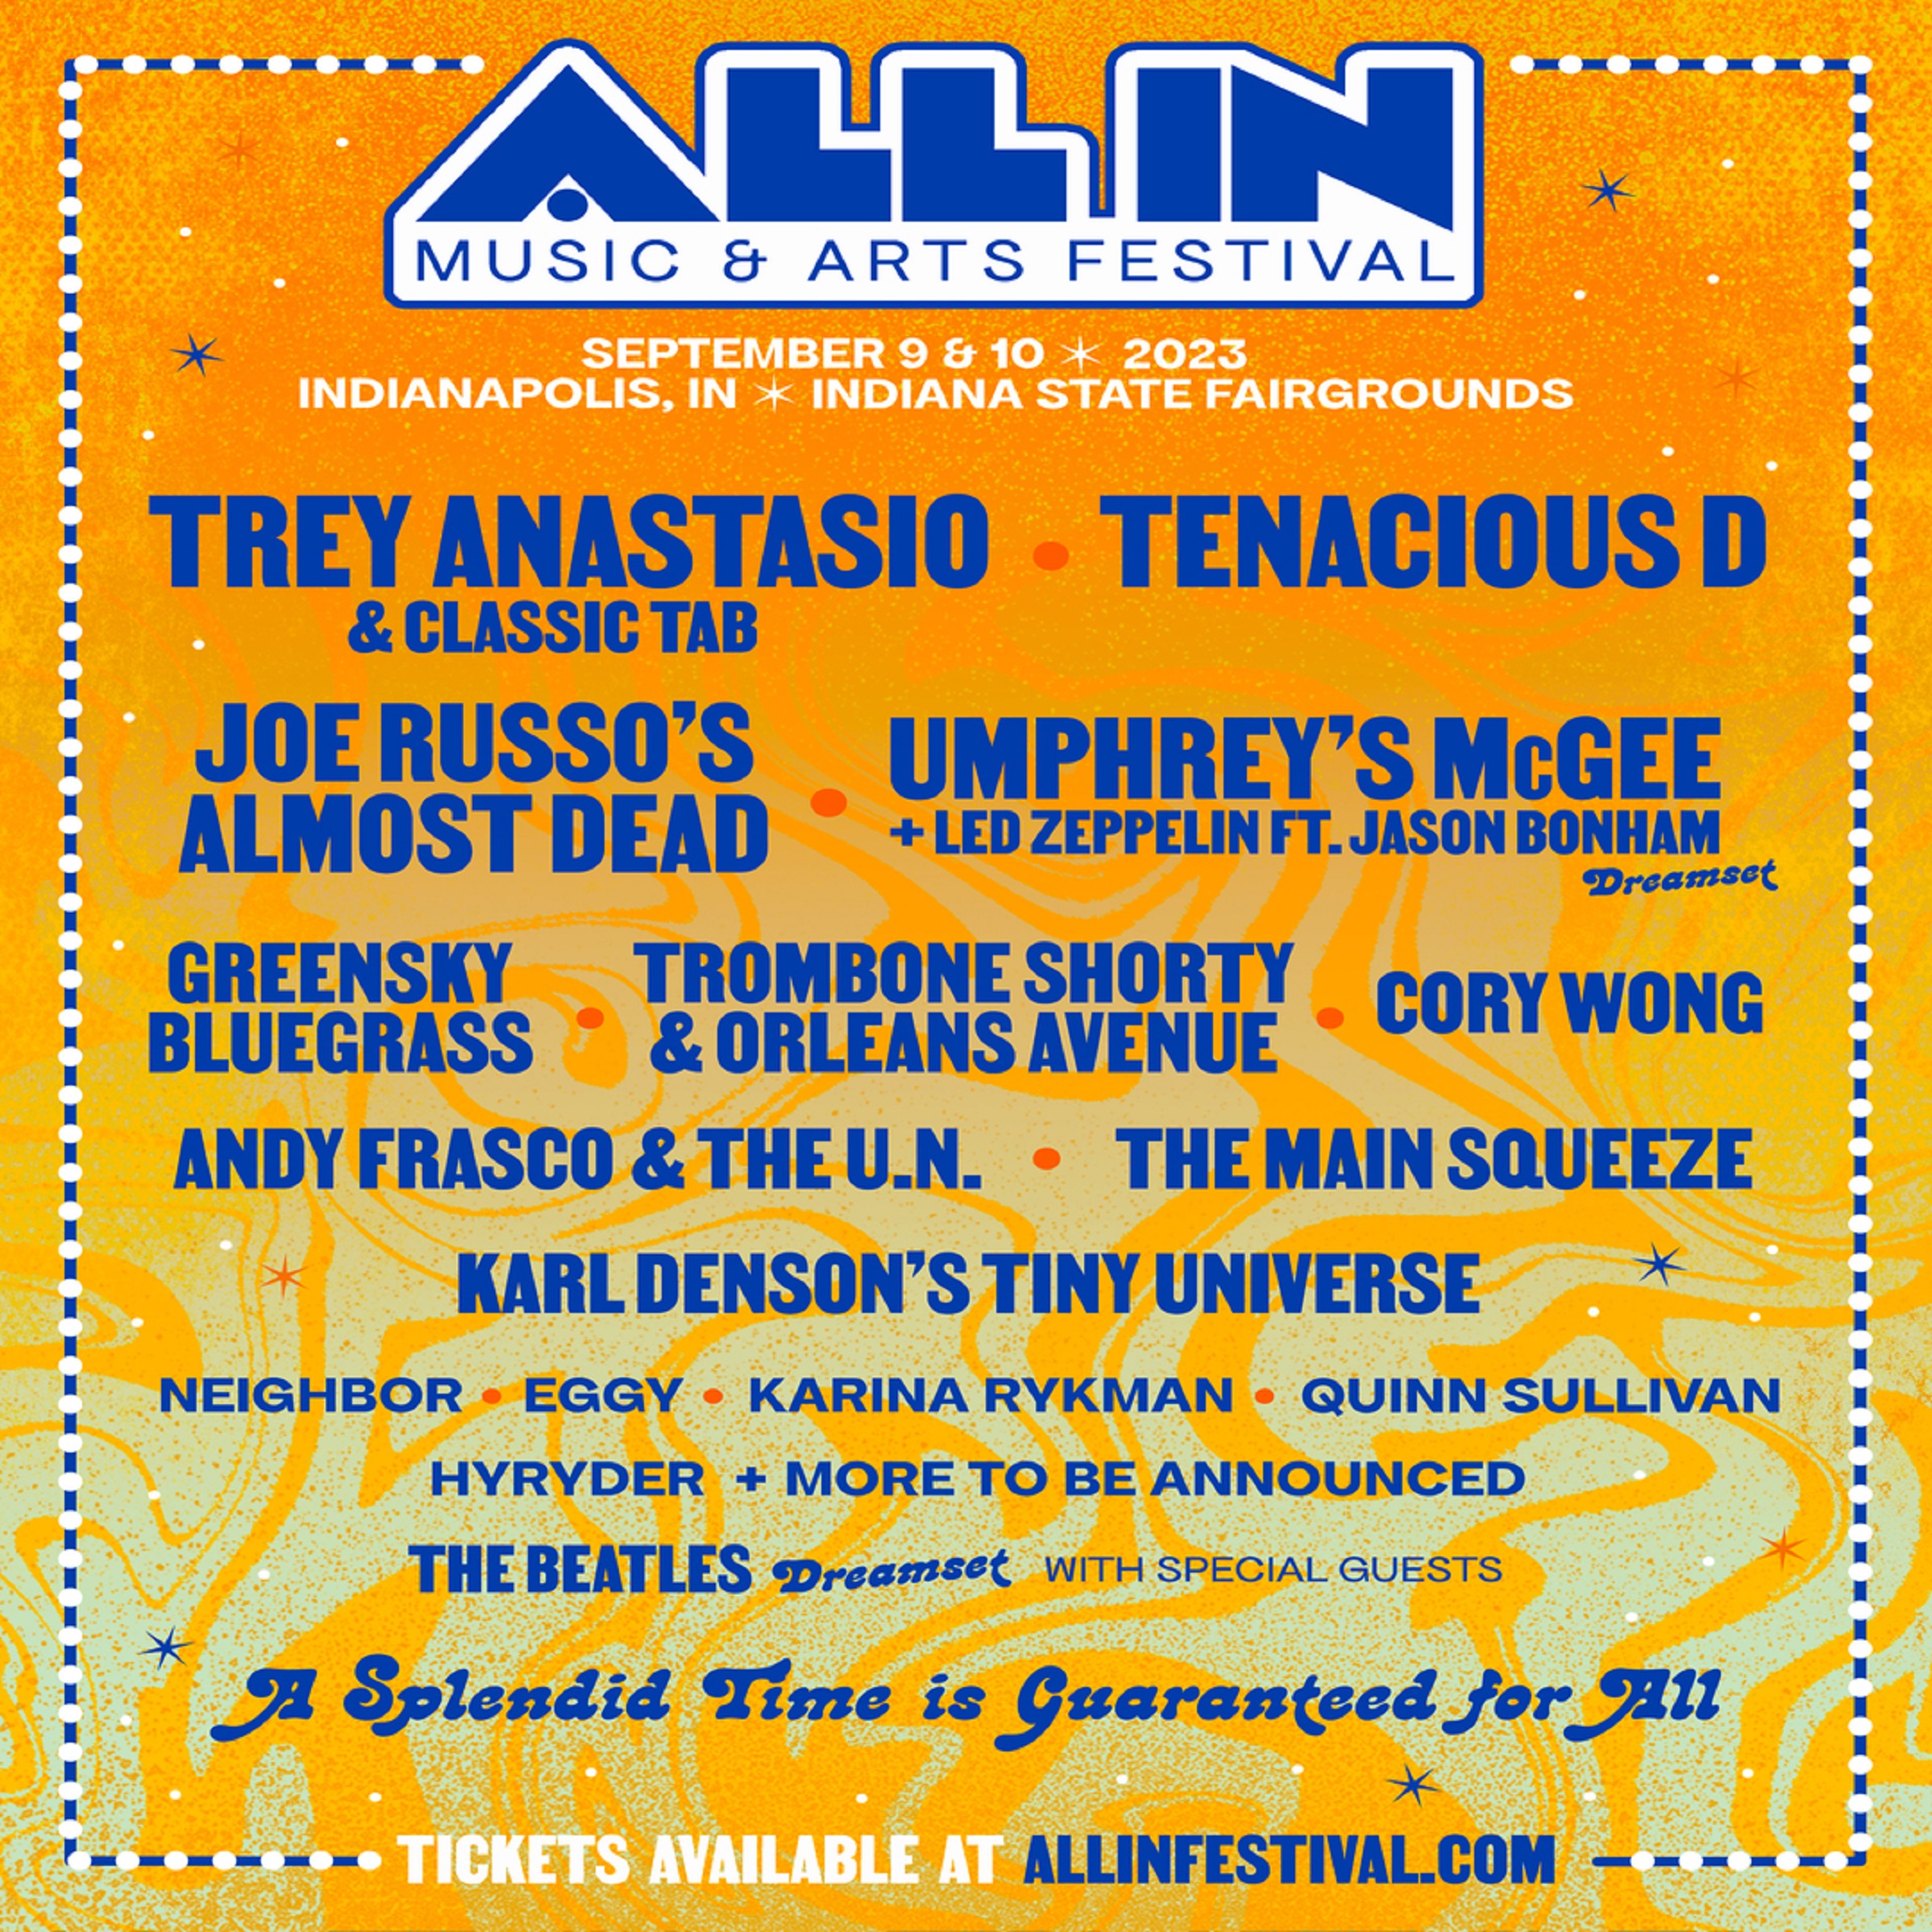 TENACIOUS D just added to ALL IN MUSIC & ARTS FESTIVAL in Indianapolis this September